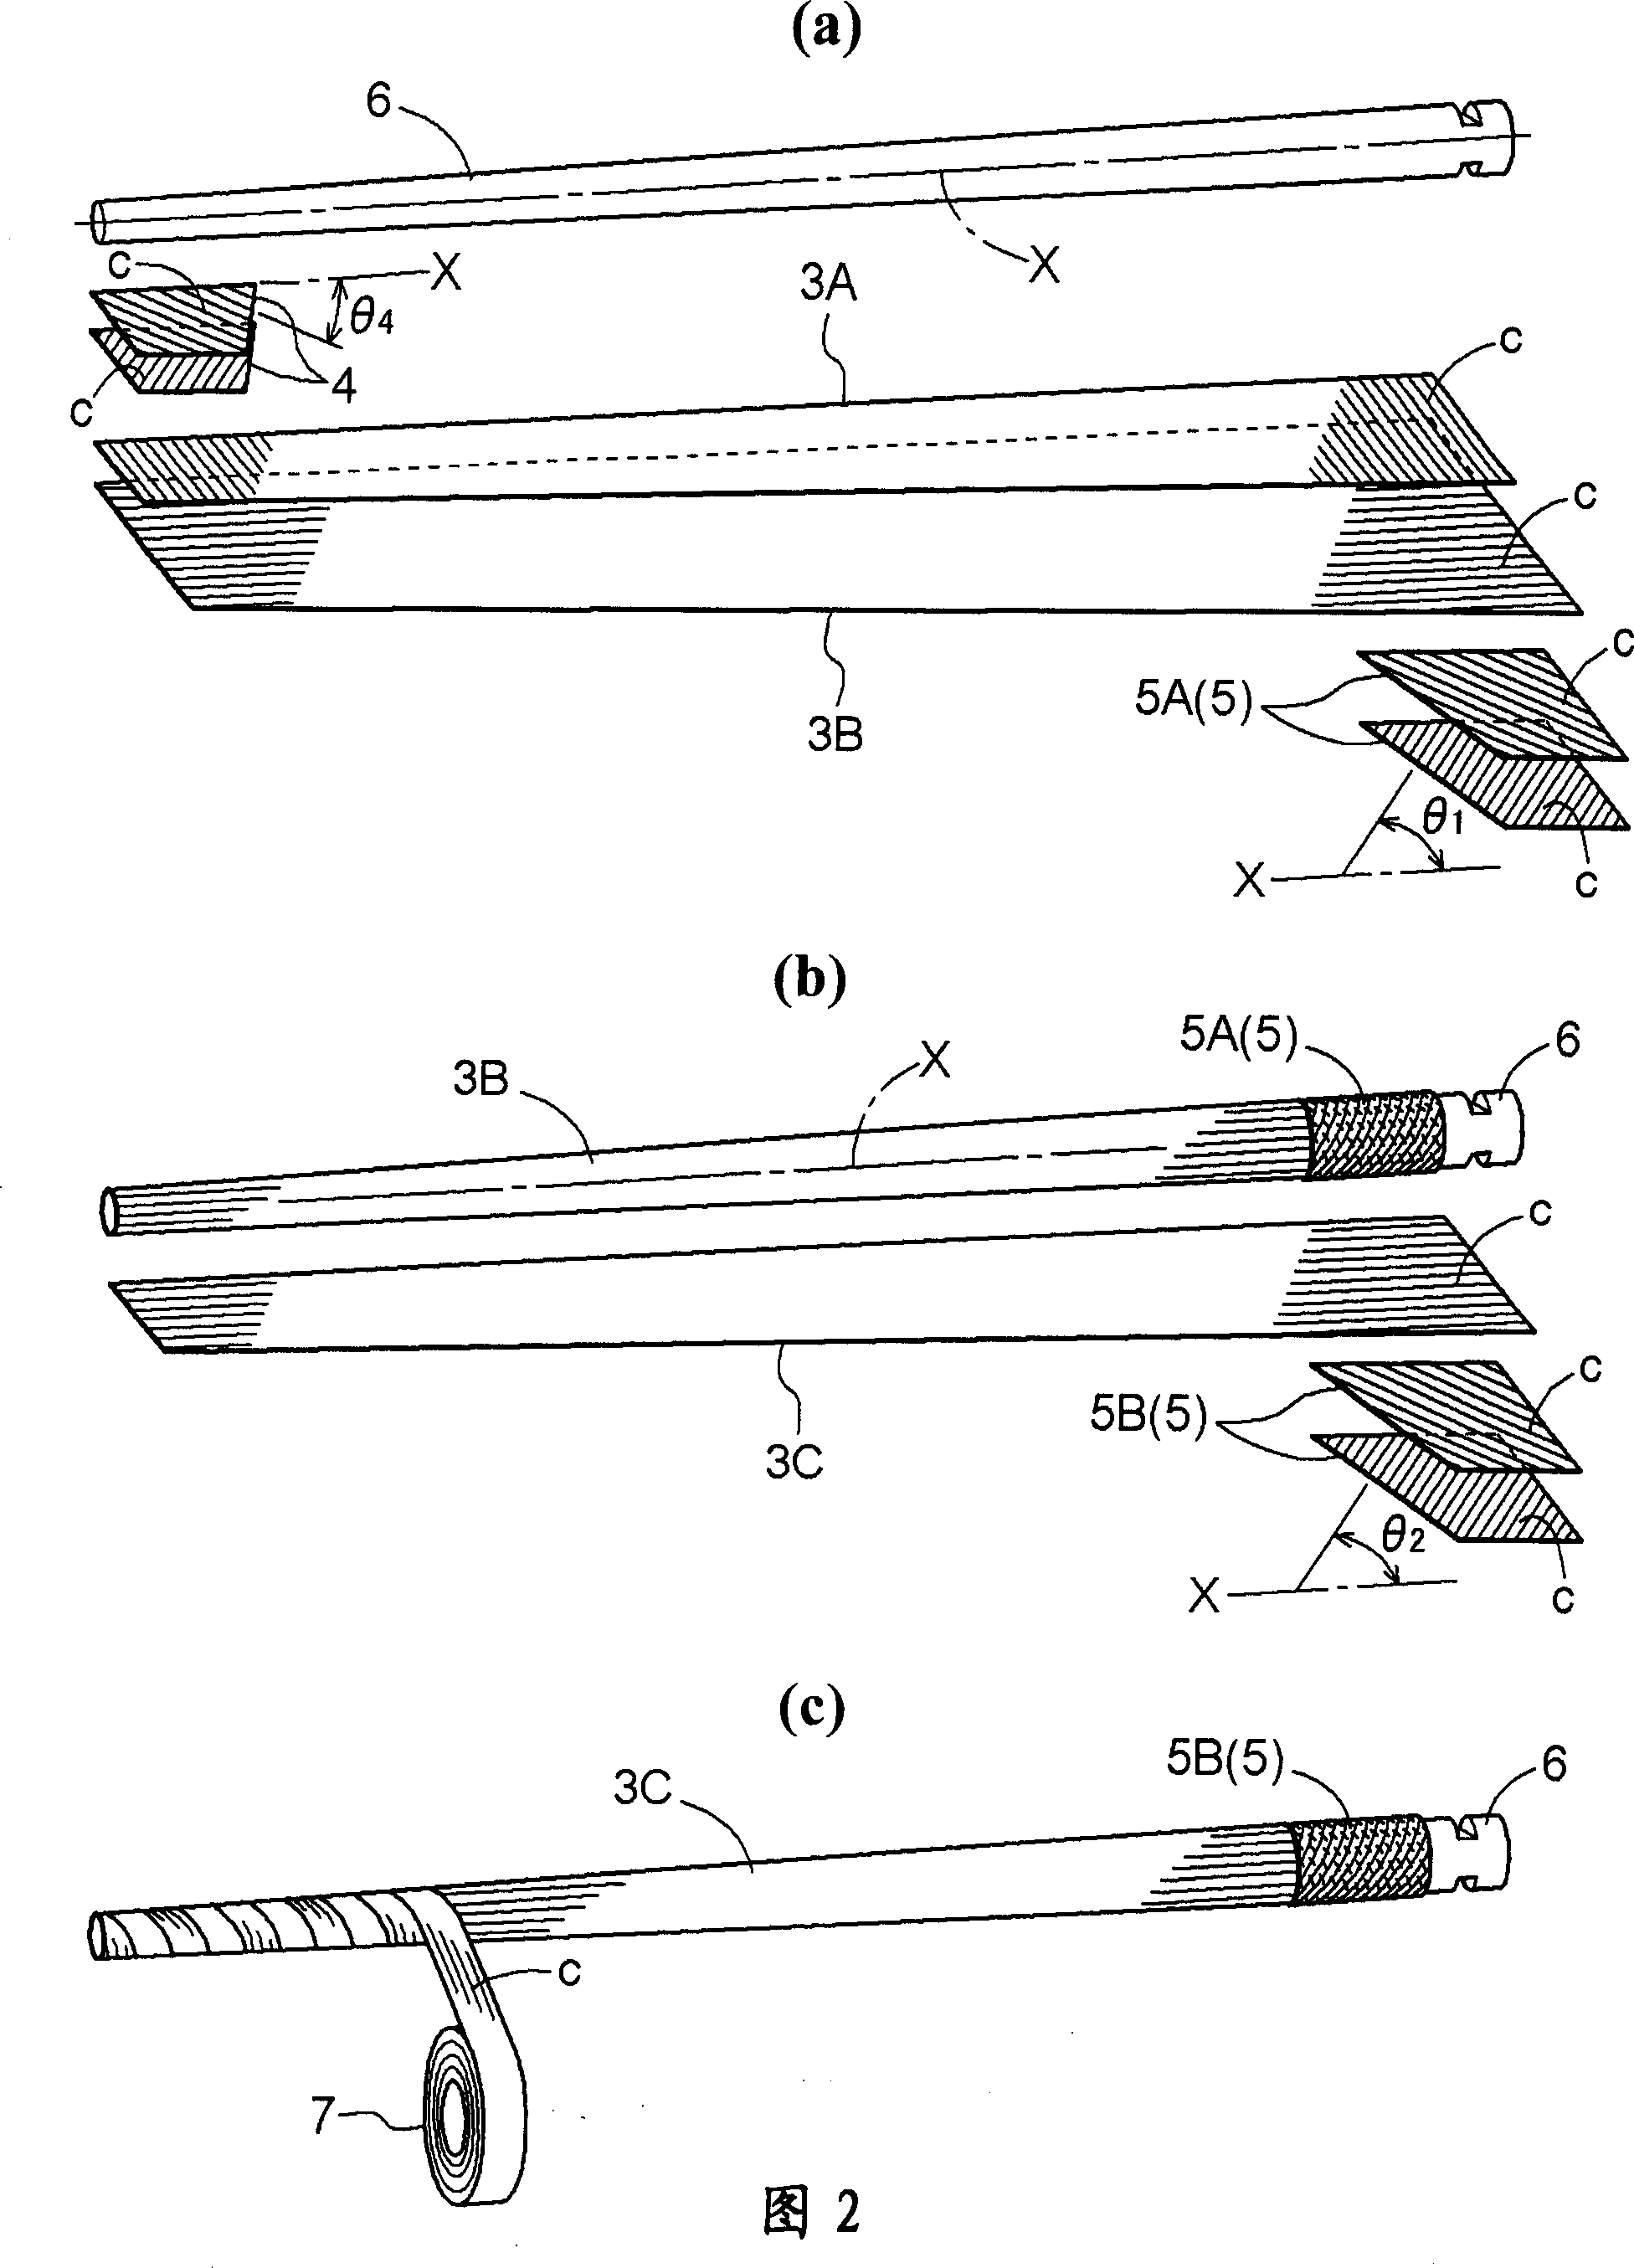 Rod of fishing pole and method for manufacturing same